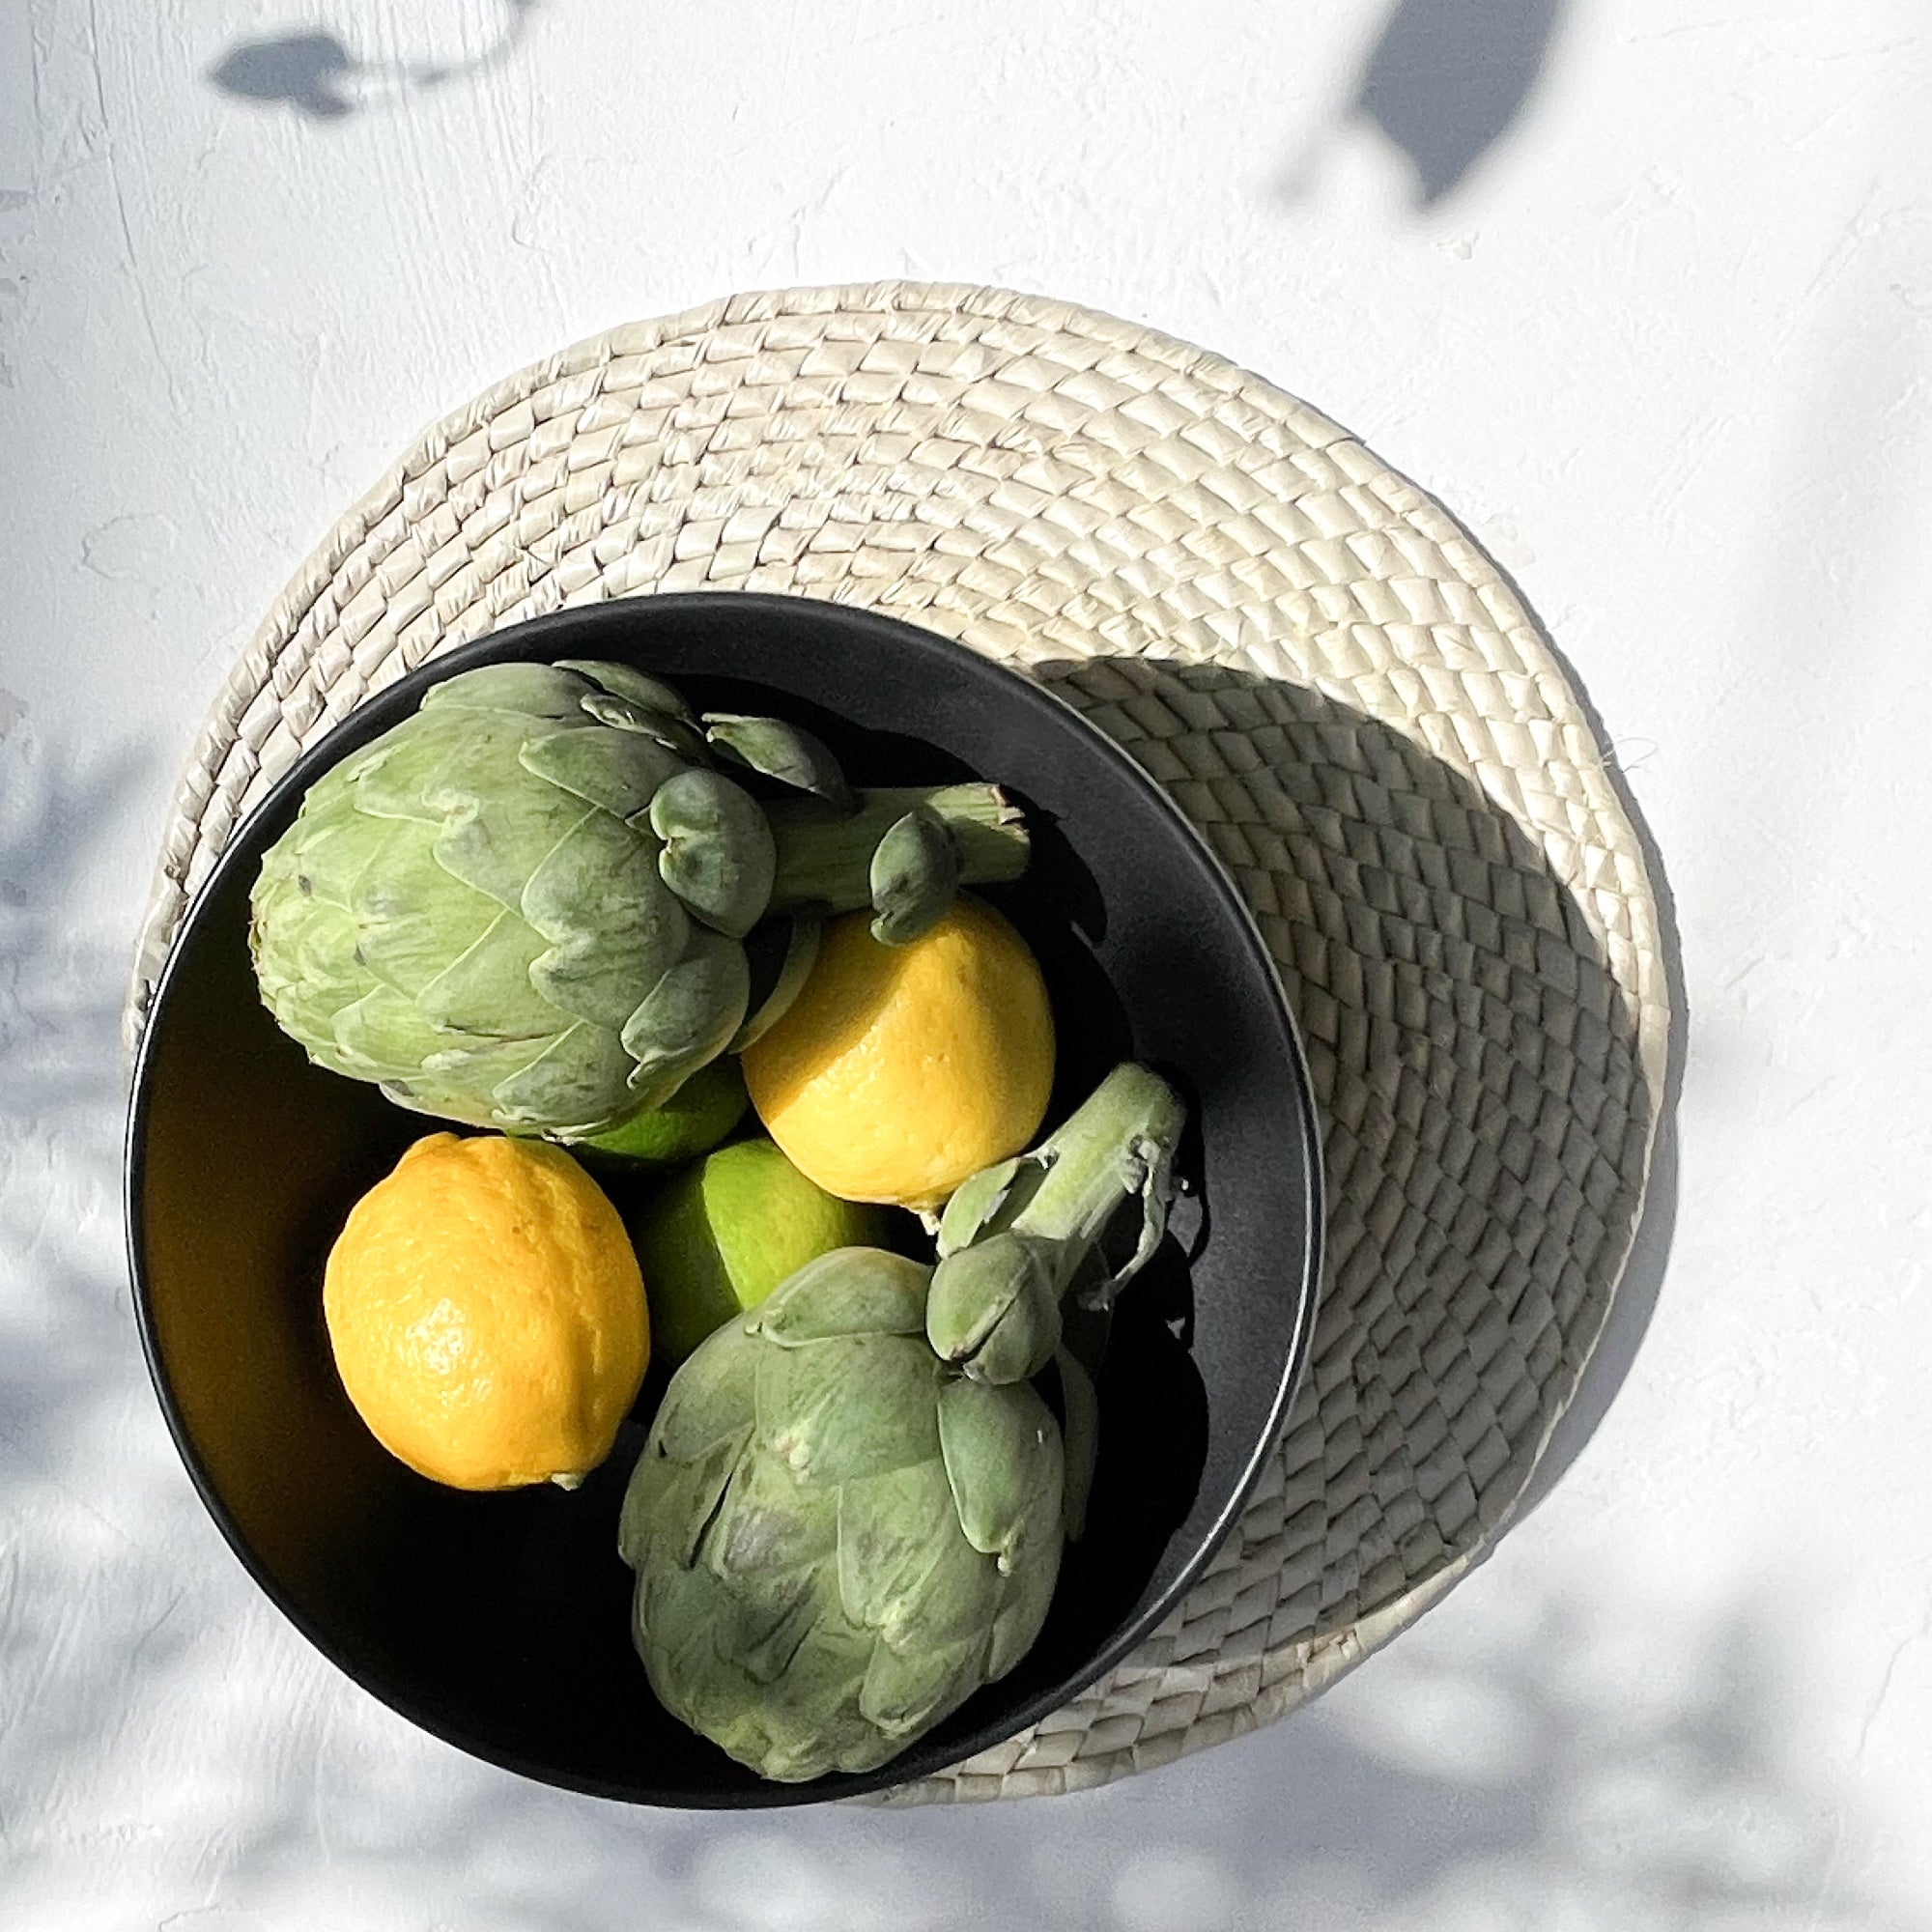 Matte black stoneware ceramic serving bowl with artichokes, fruit and a handwoven palm placemat.